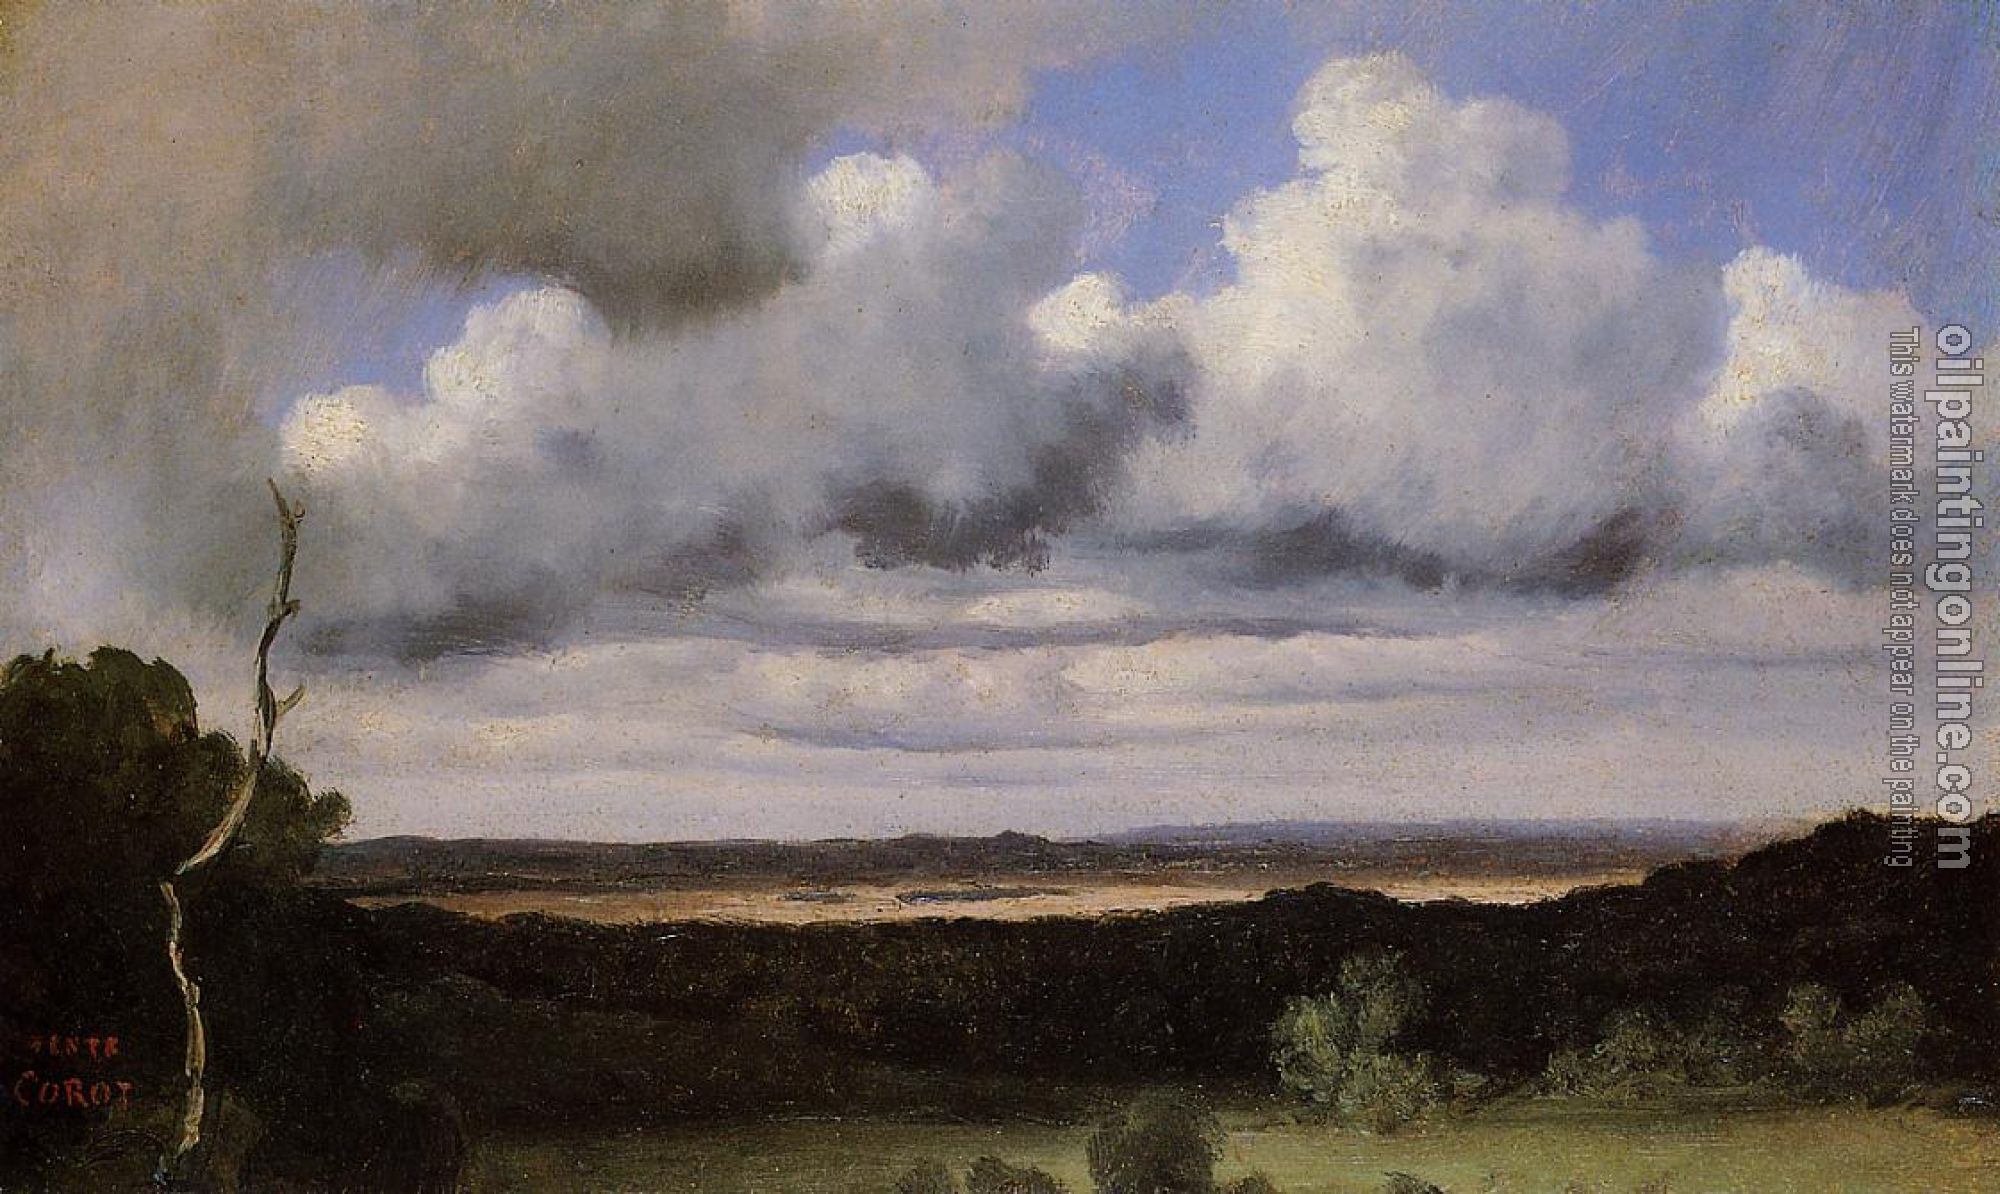 Corot, Jean-Baptiste-Camille - Fontainebleau, Storm over the Plains